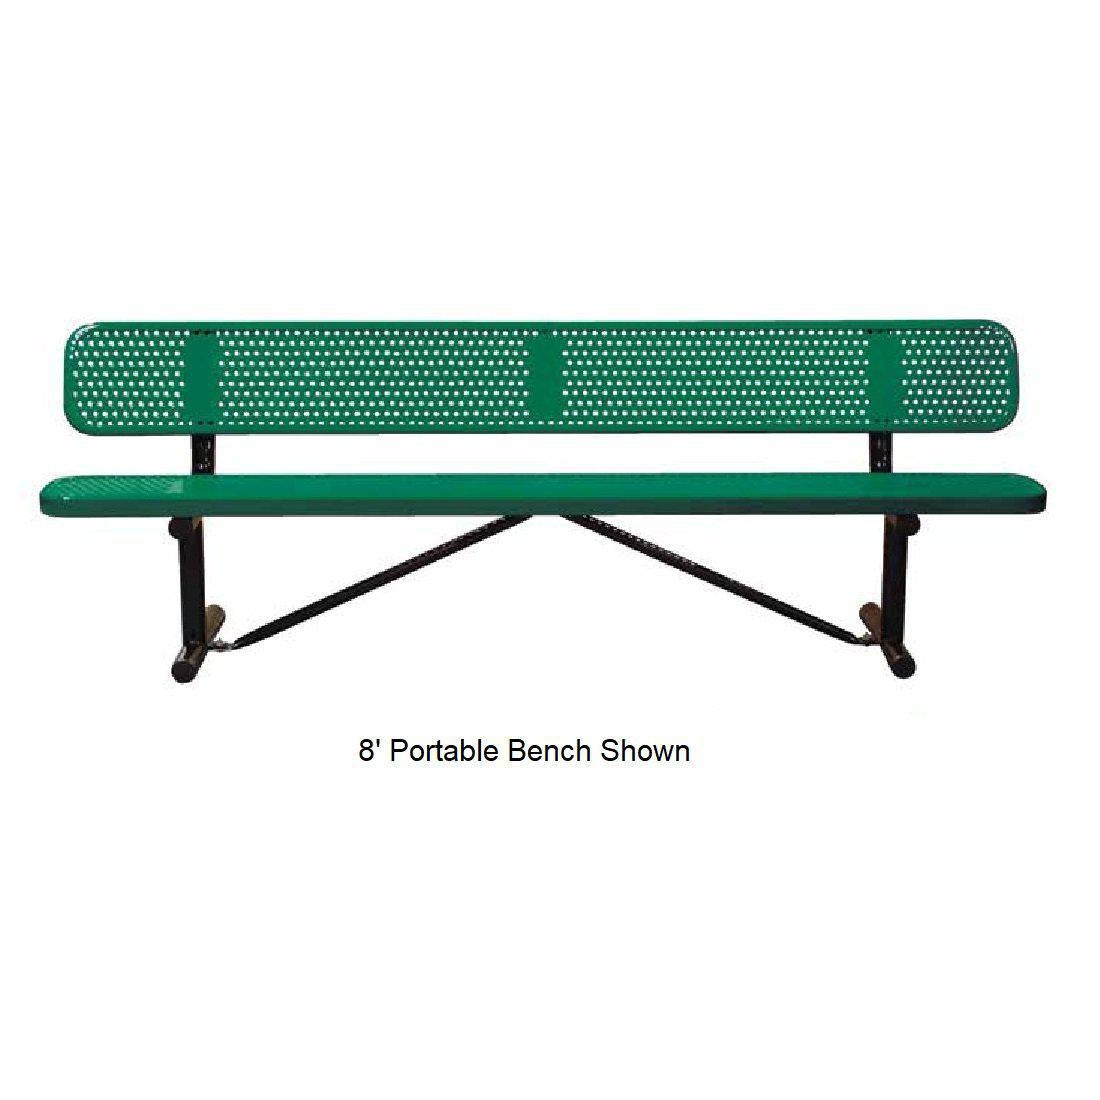 6’ Standard Perforated Bench With Back, Portable